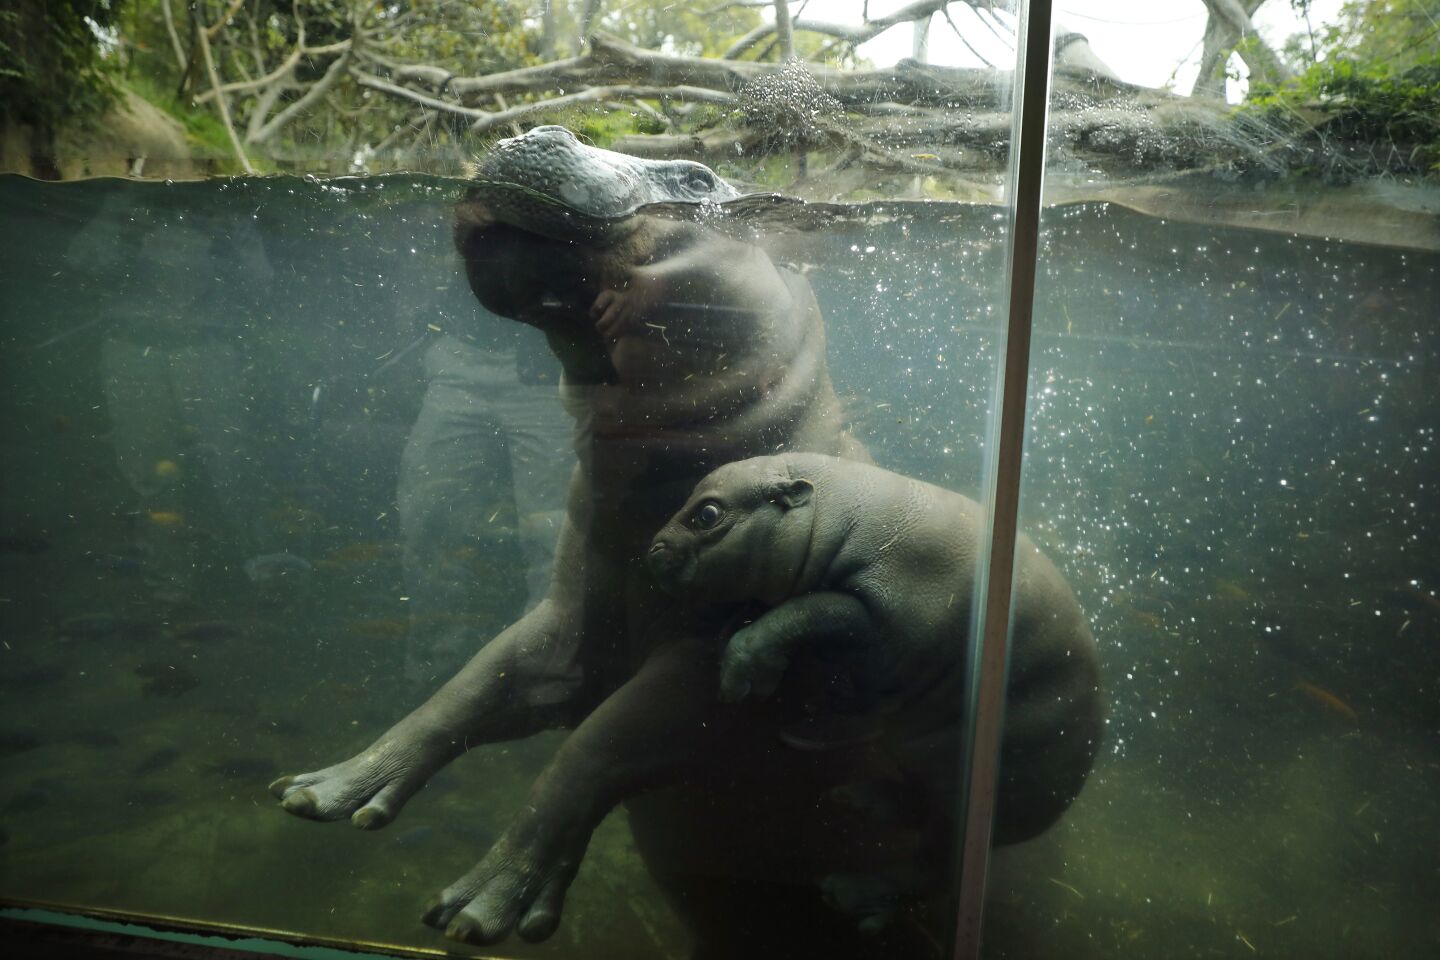 Akobi, a 40-pound, 67-day-old pygmy hippopotamus, swims with his mom Mabel at the San Diego Zoo on June 15, 2020. Akobi was introduced to the public for the first time as it explored the main exhibit for the first time Monday.